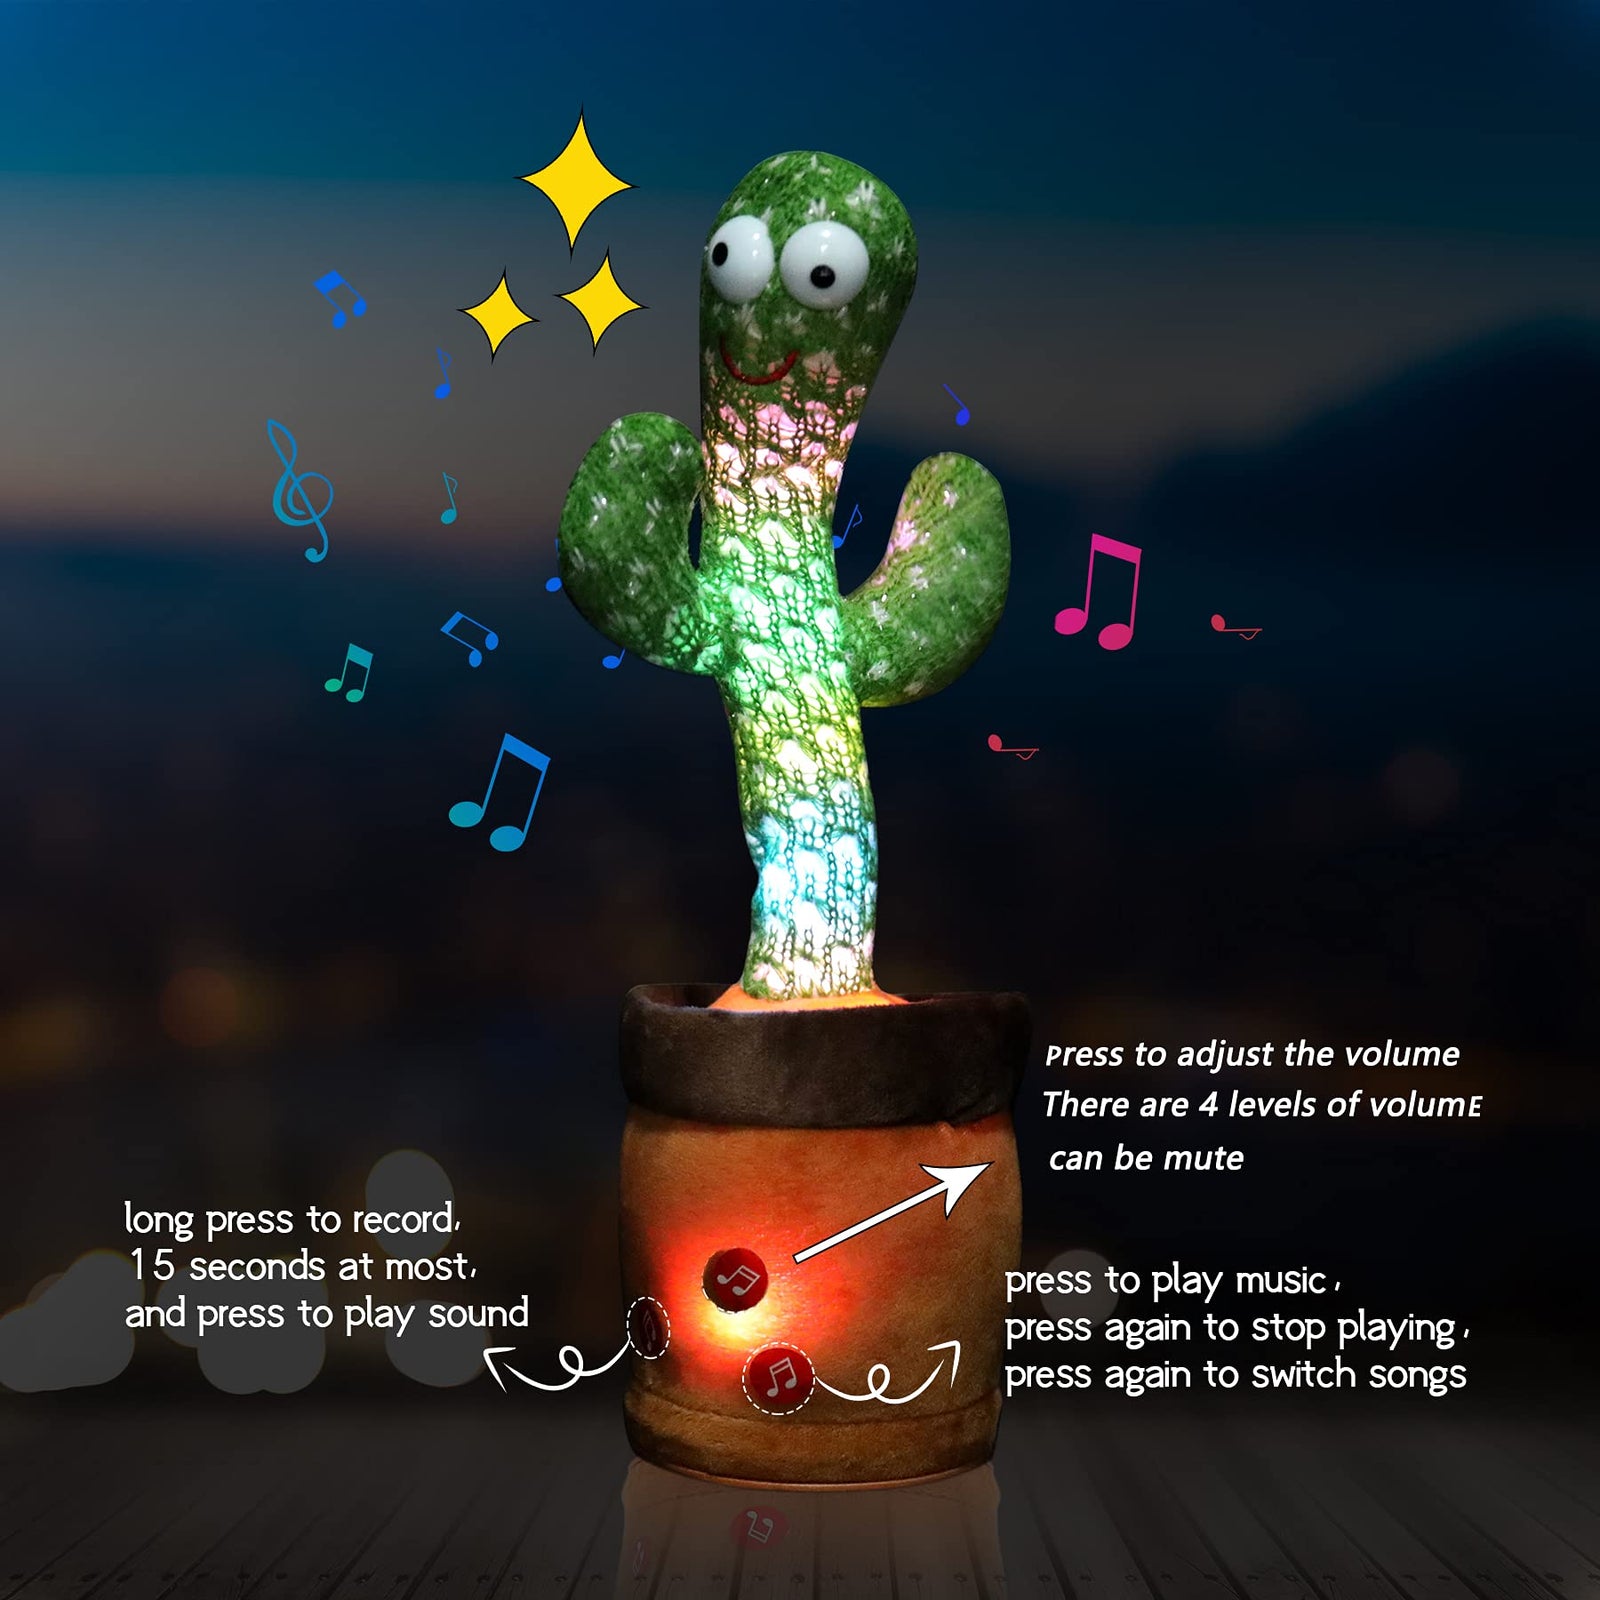 MIAODAM Volume Adjustable Dancing Cactus, Colorful Glowing Talking Cactus Toy, Repeating What You Say Cactus Toys Singing 120 Songs Cactus Plush Eletronic Baby Toys Funny Creative Kids Toy